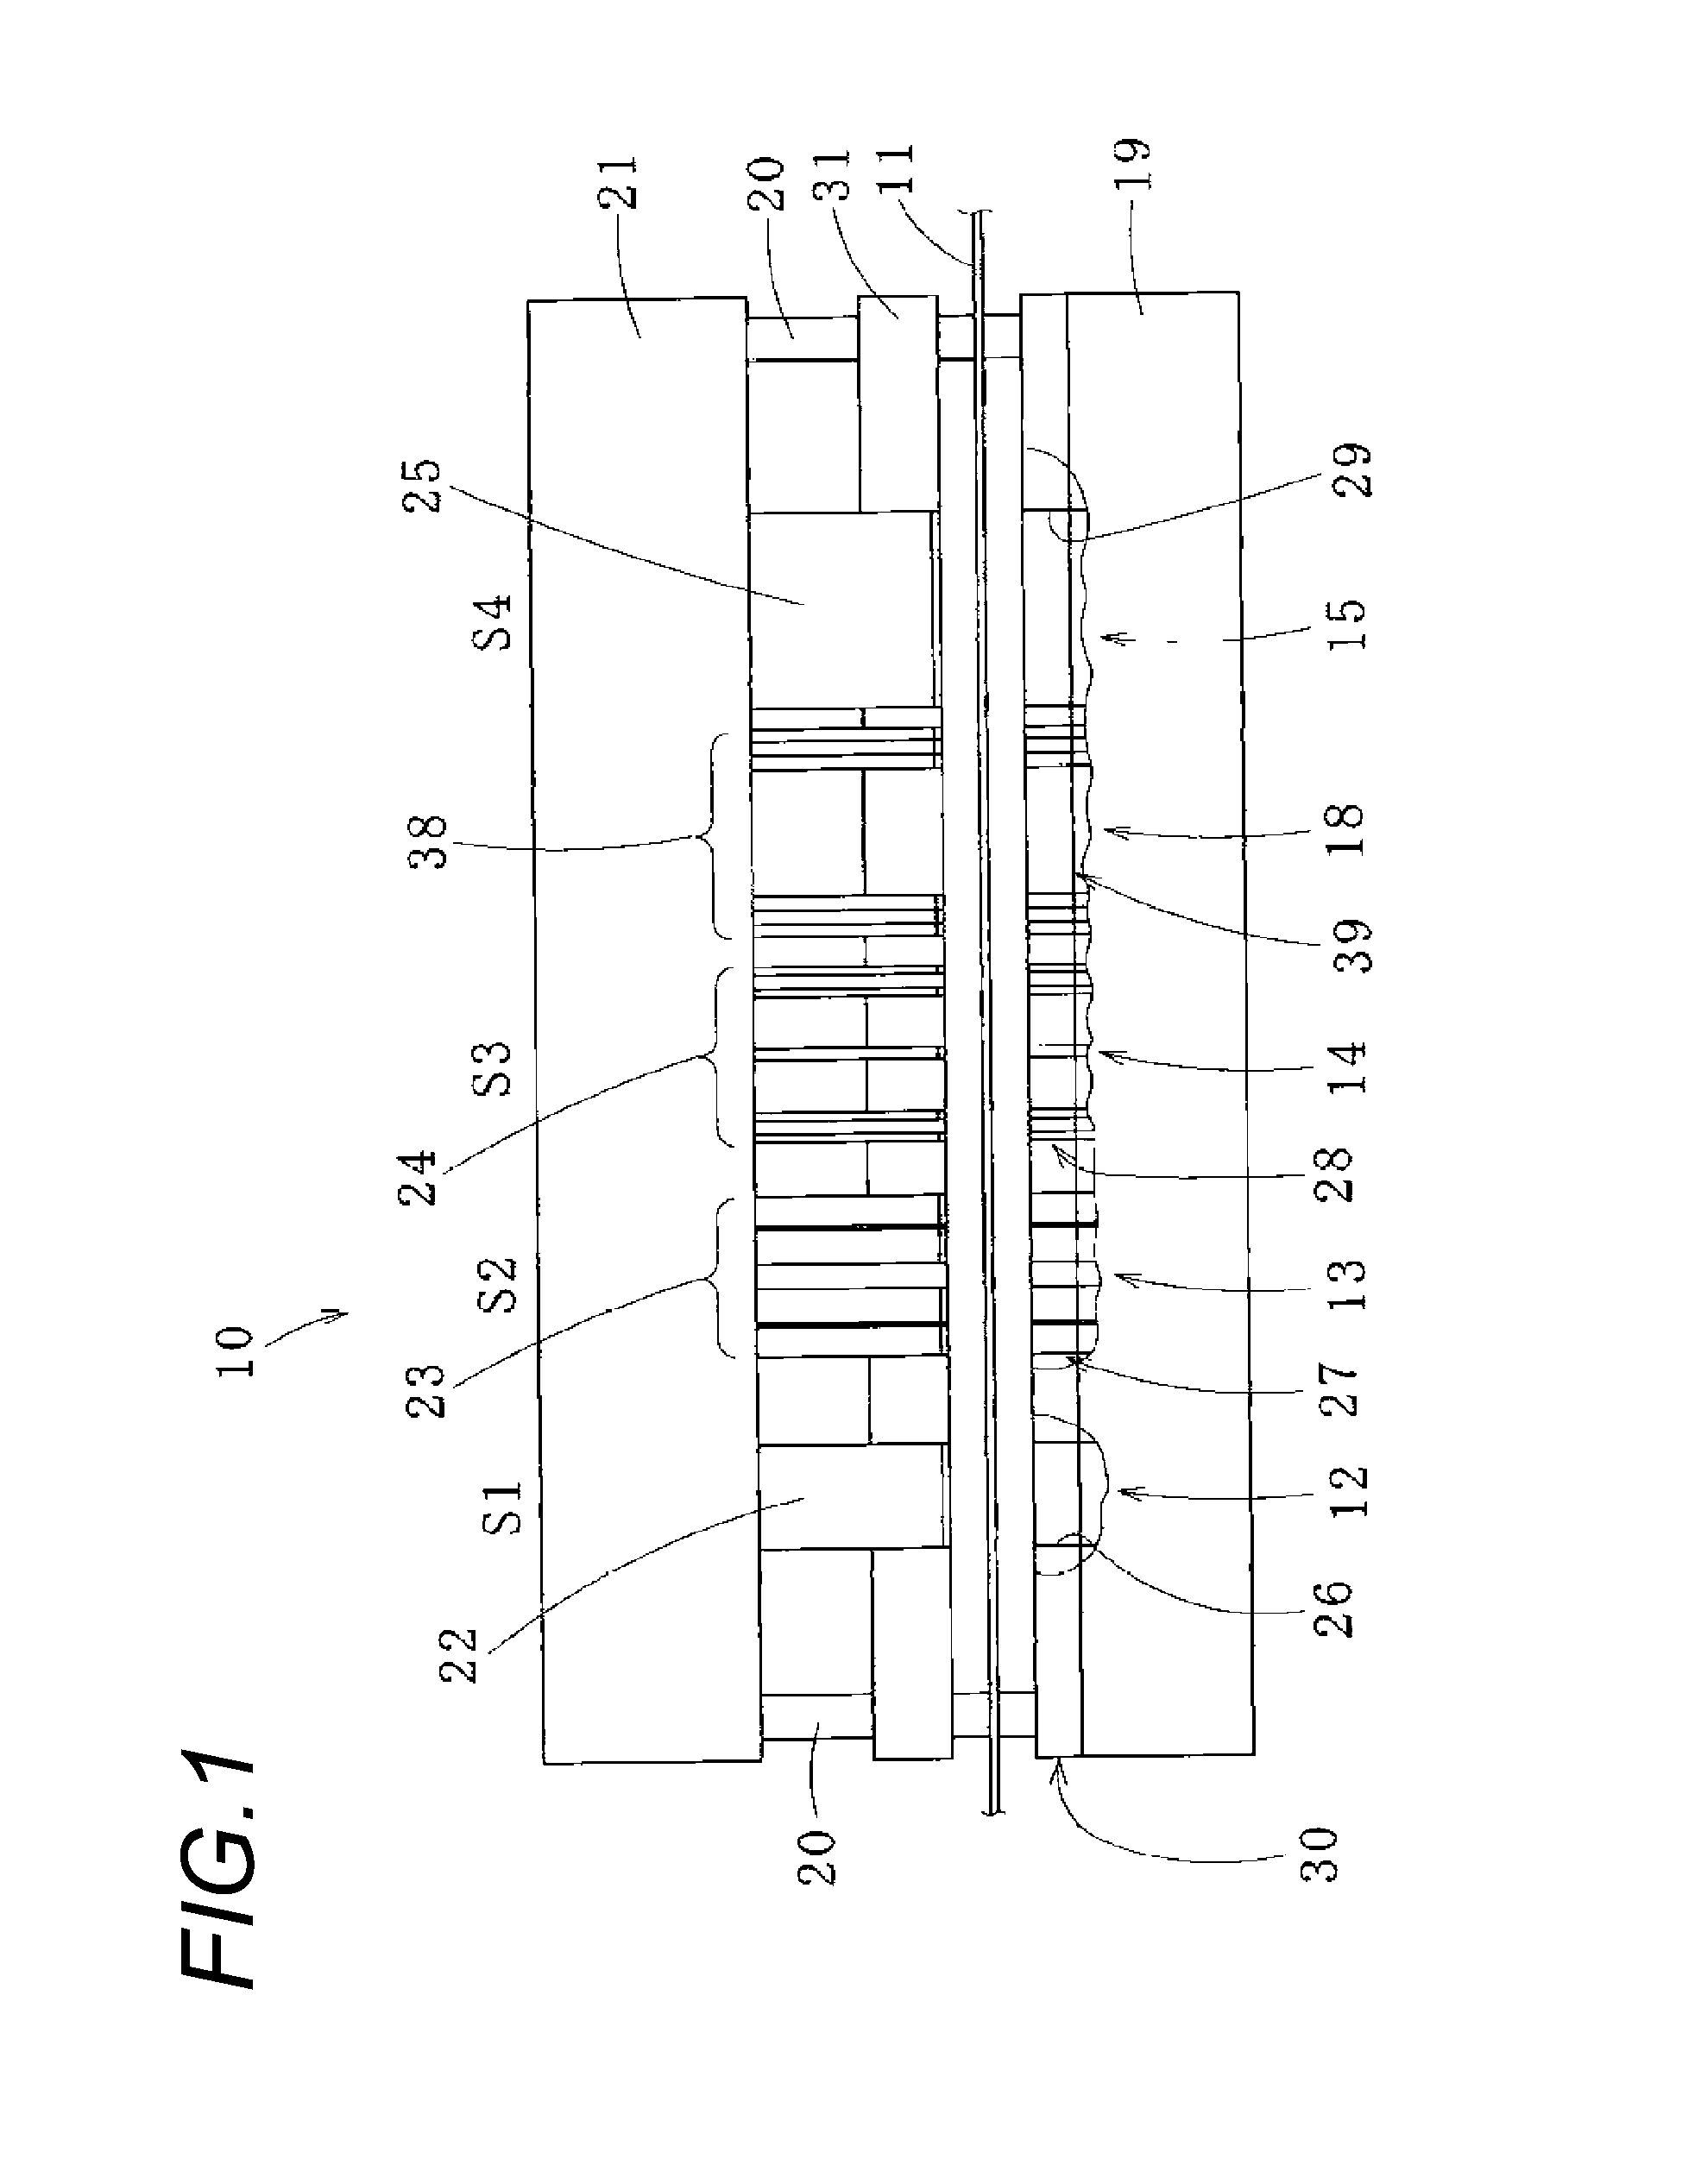 Laminated iron core manufacturing method and blanking die apparatus